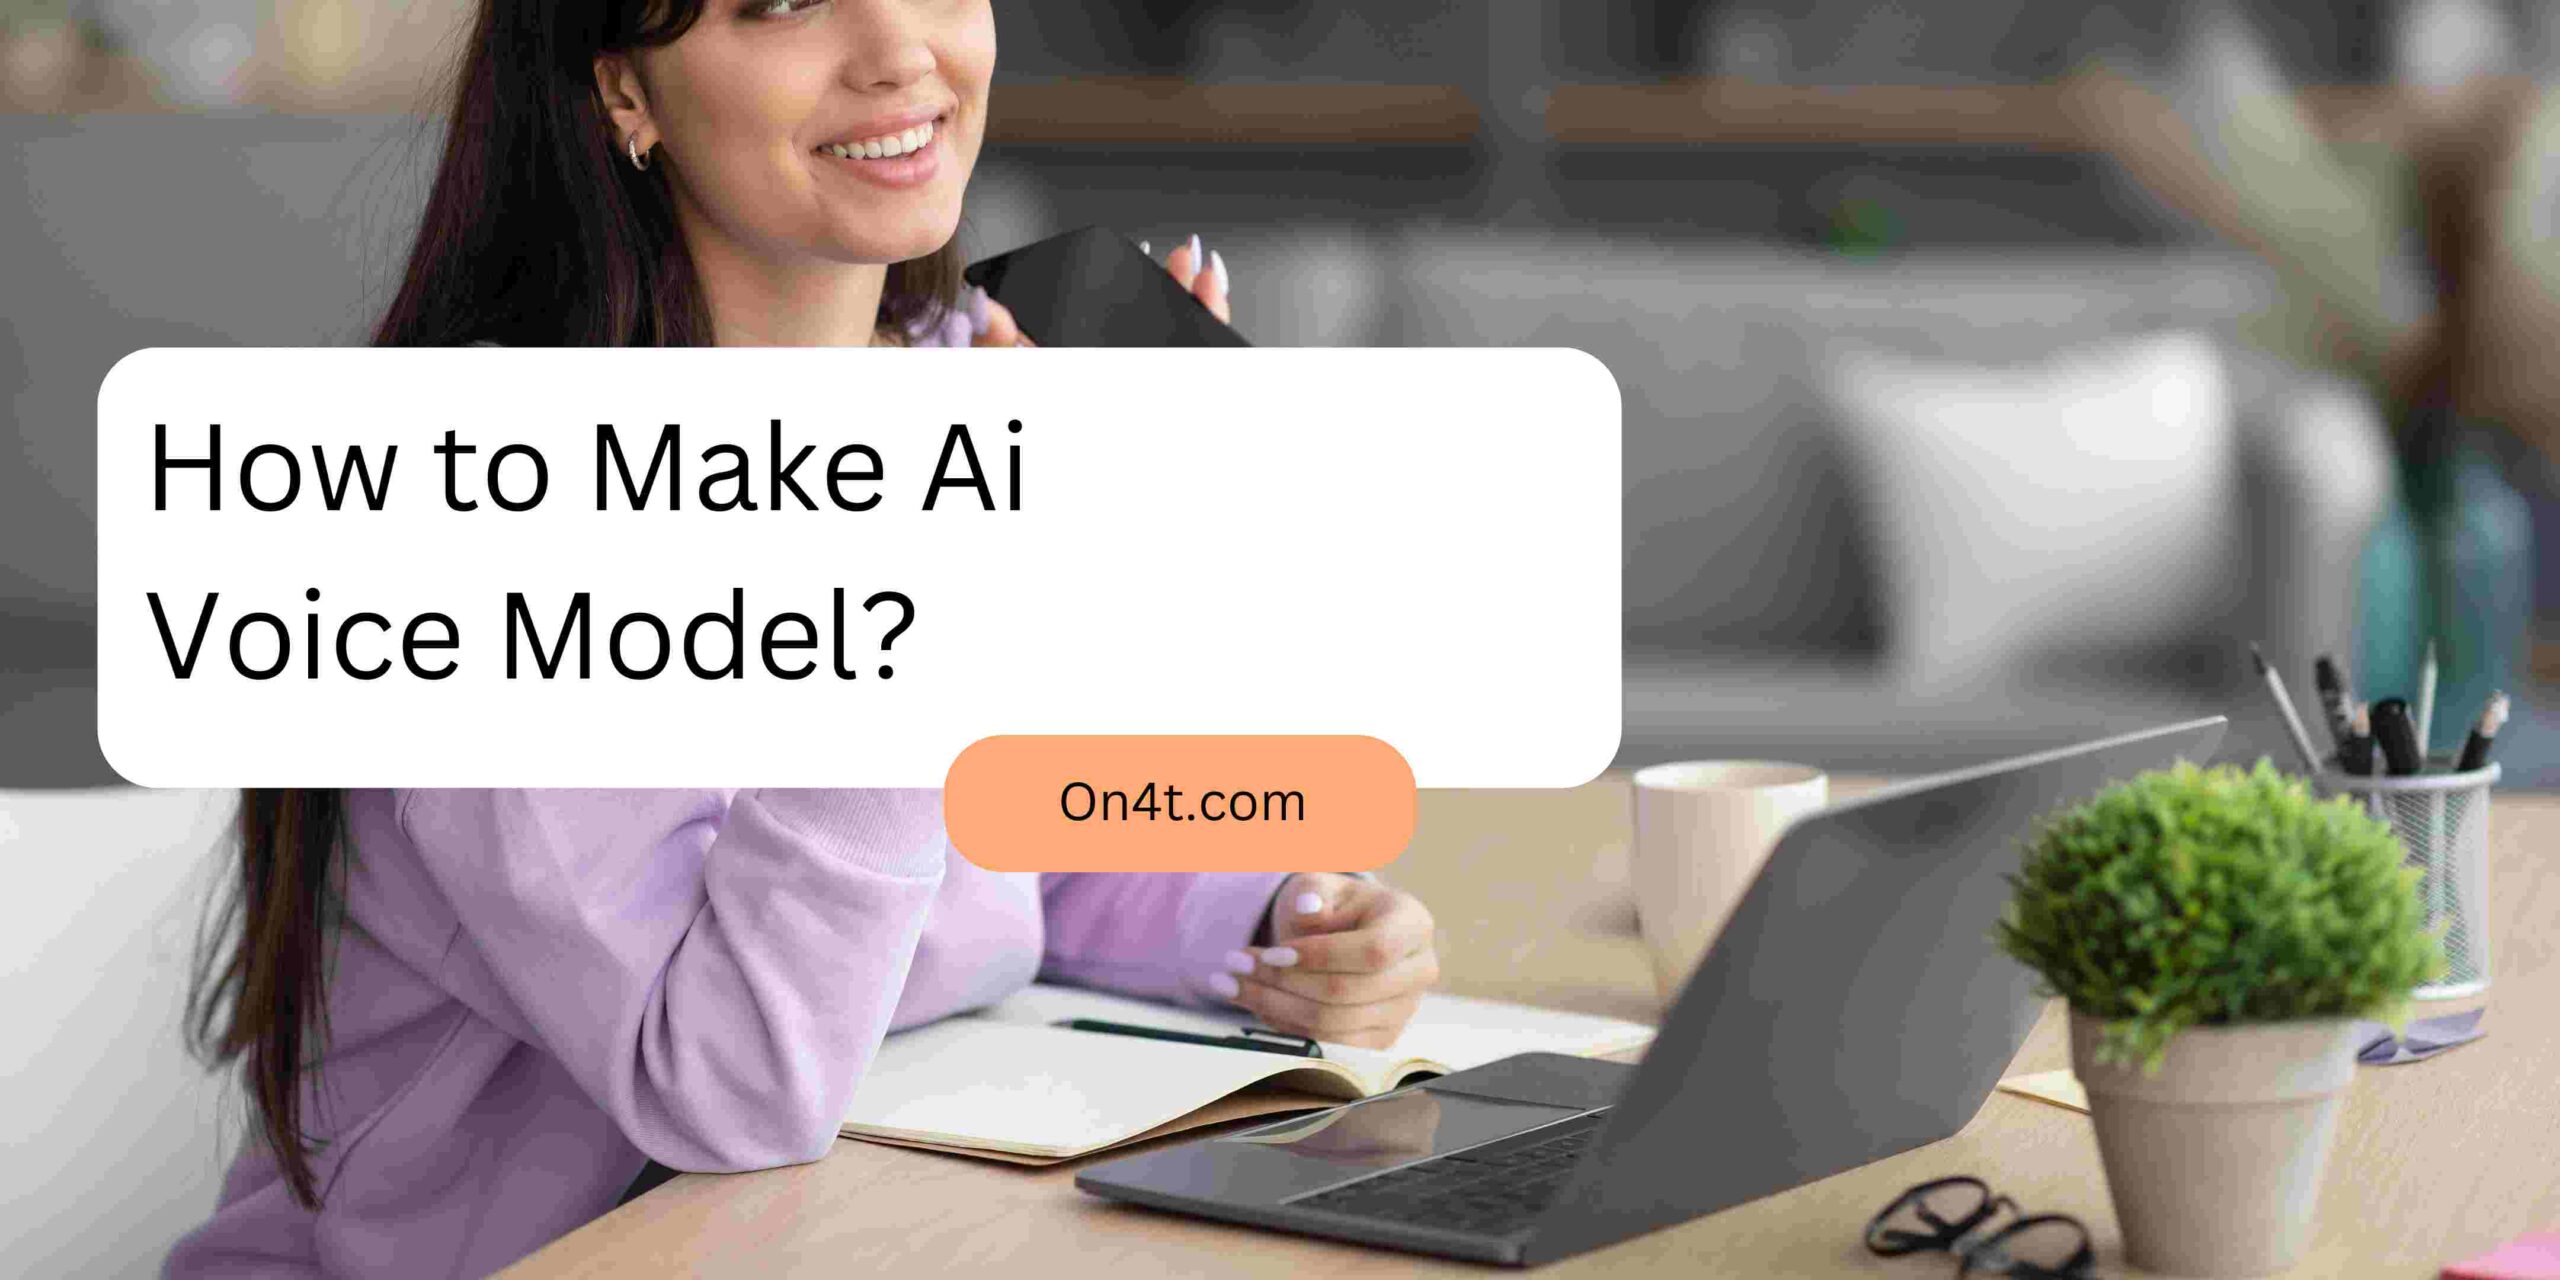 How to Make Ai Voice Model?